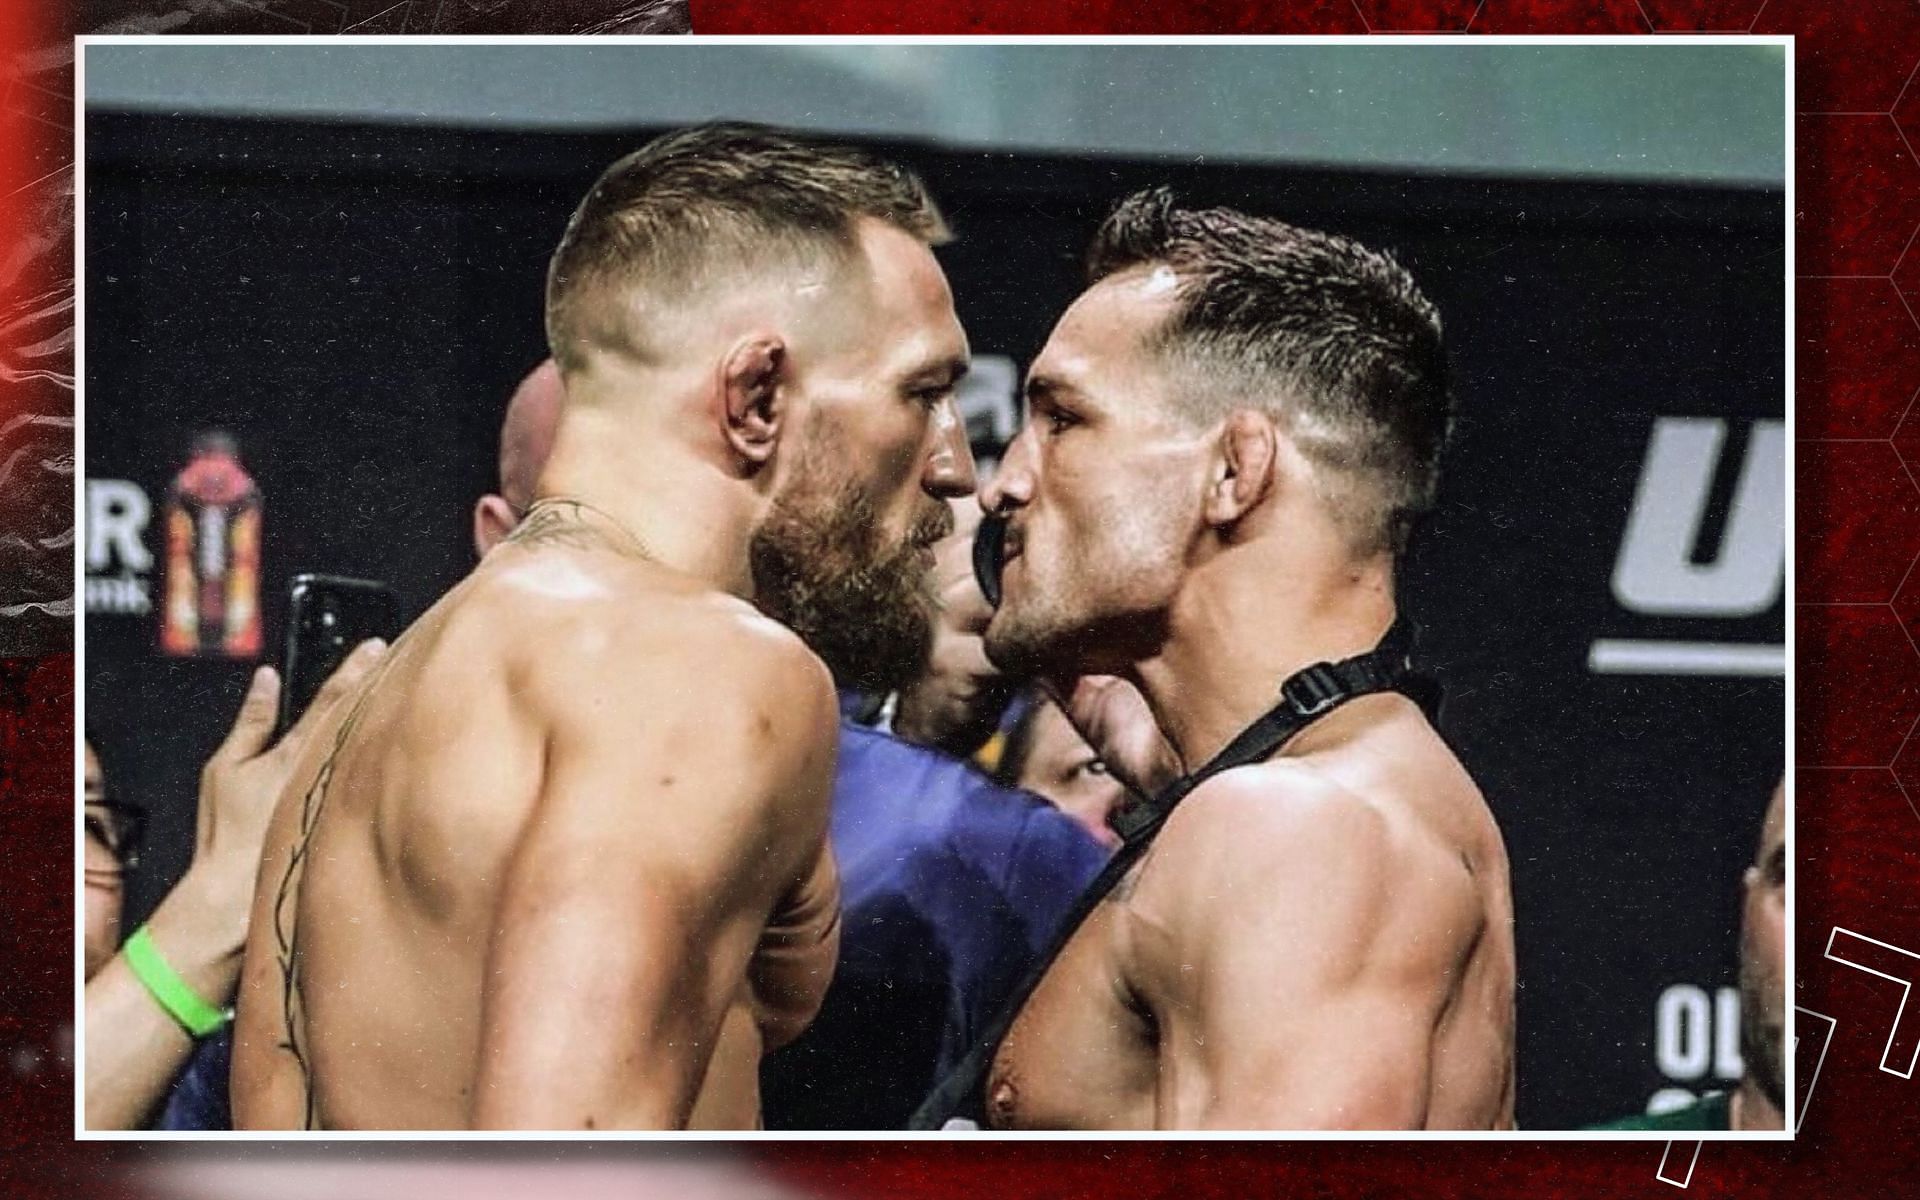 Michael Chandler (right) opens up on his delayed fight with Conor McGregor (left) [Image credits: @michaelchandlermma on Instagram]